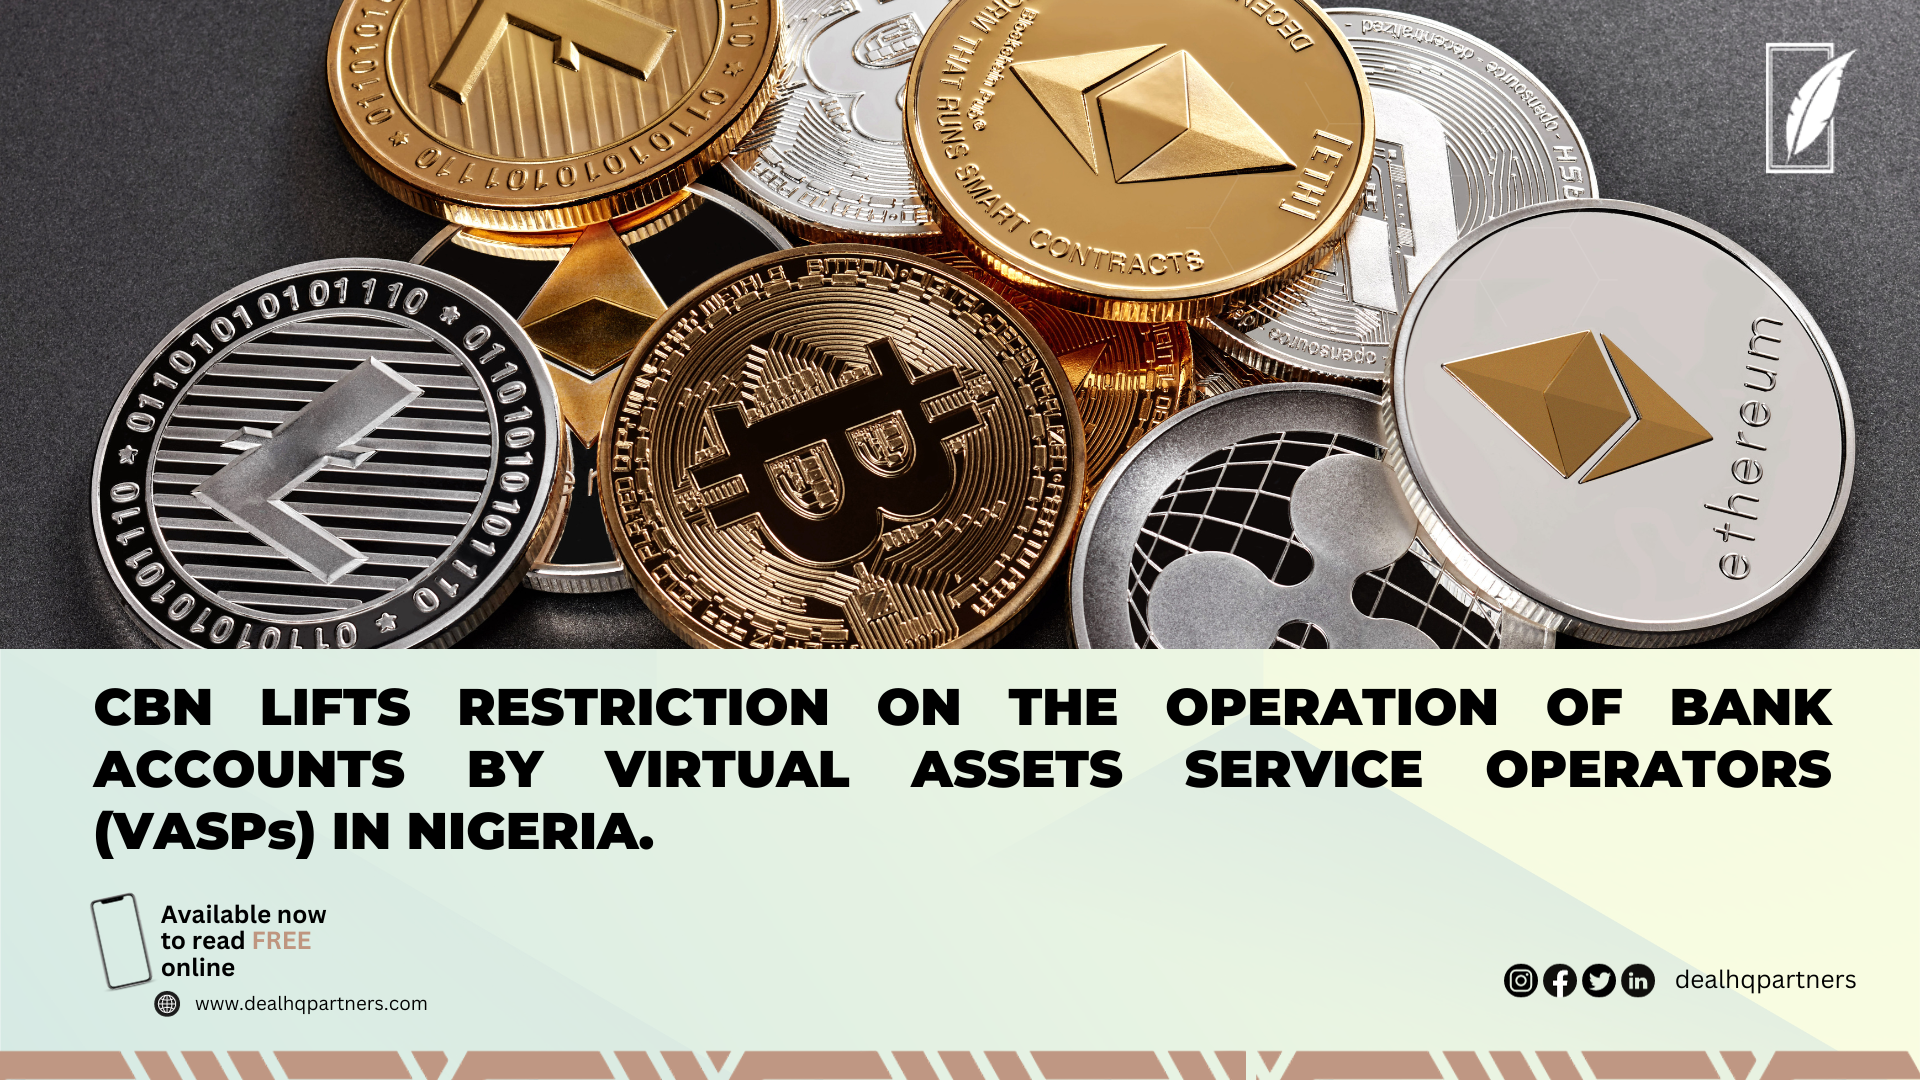 CBN LIFTS RESTRICTION ON THE OPERATION OF BANK ACCOUNTS BY VIRTUAL ASSETS SERVICE OPERATORS (VASPs) IN NIGERIA.